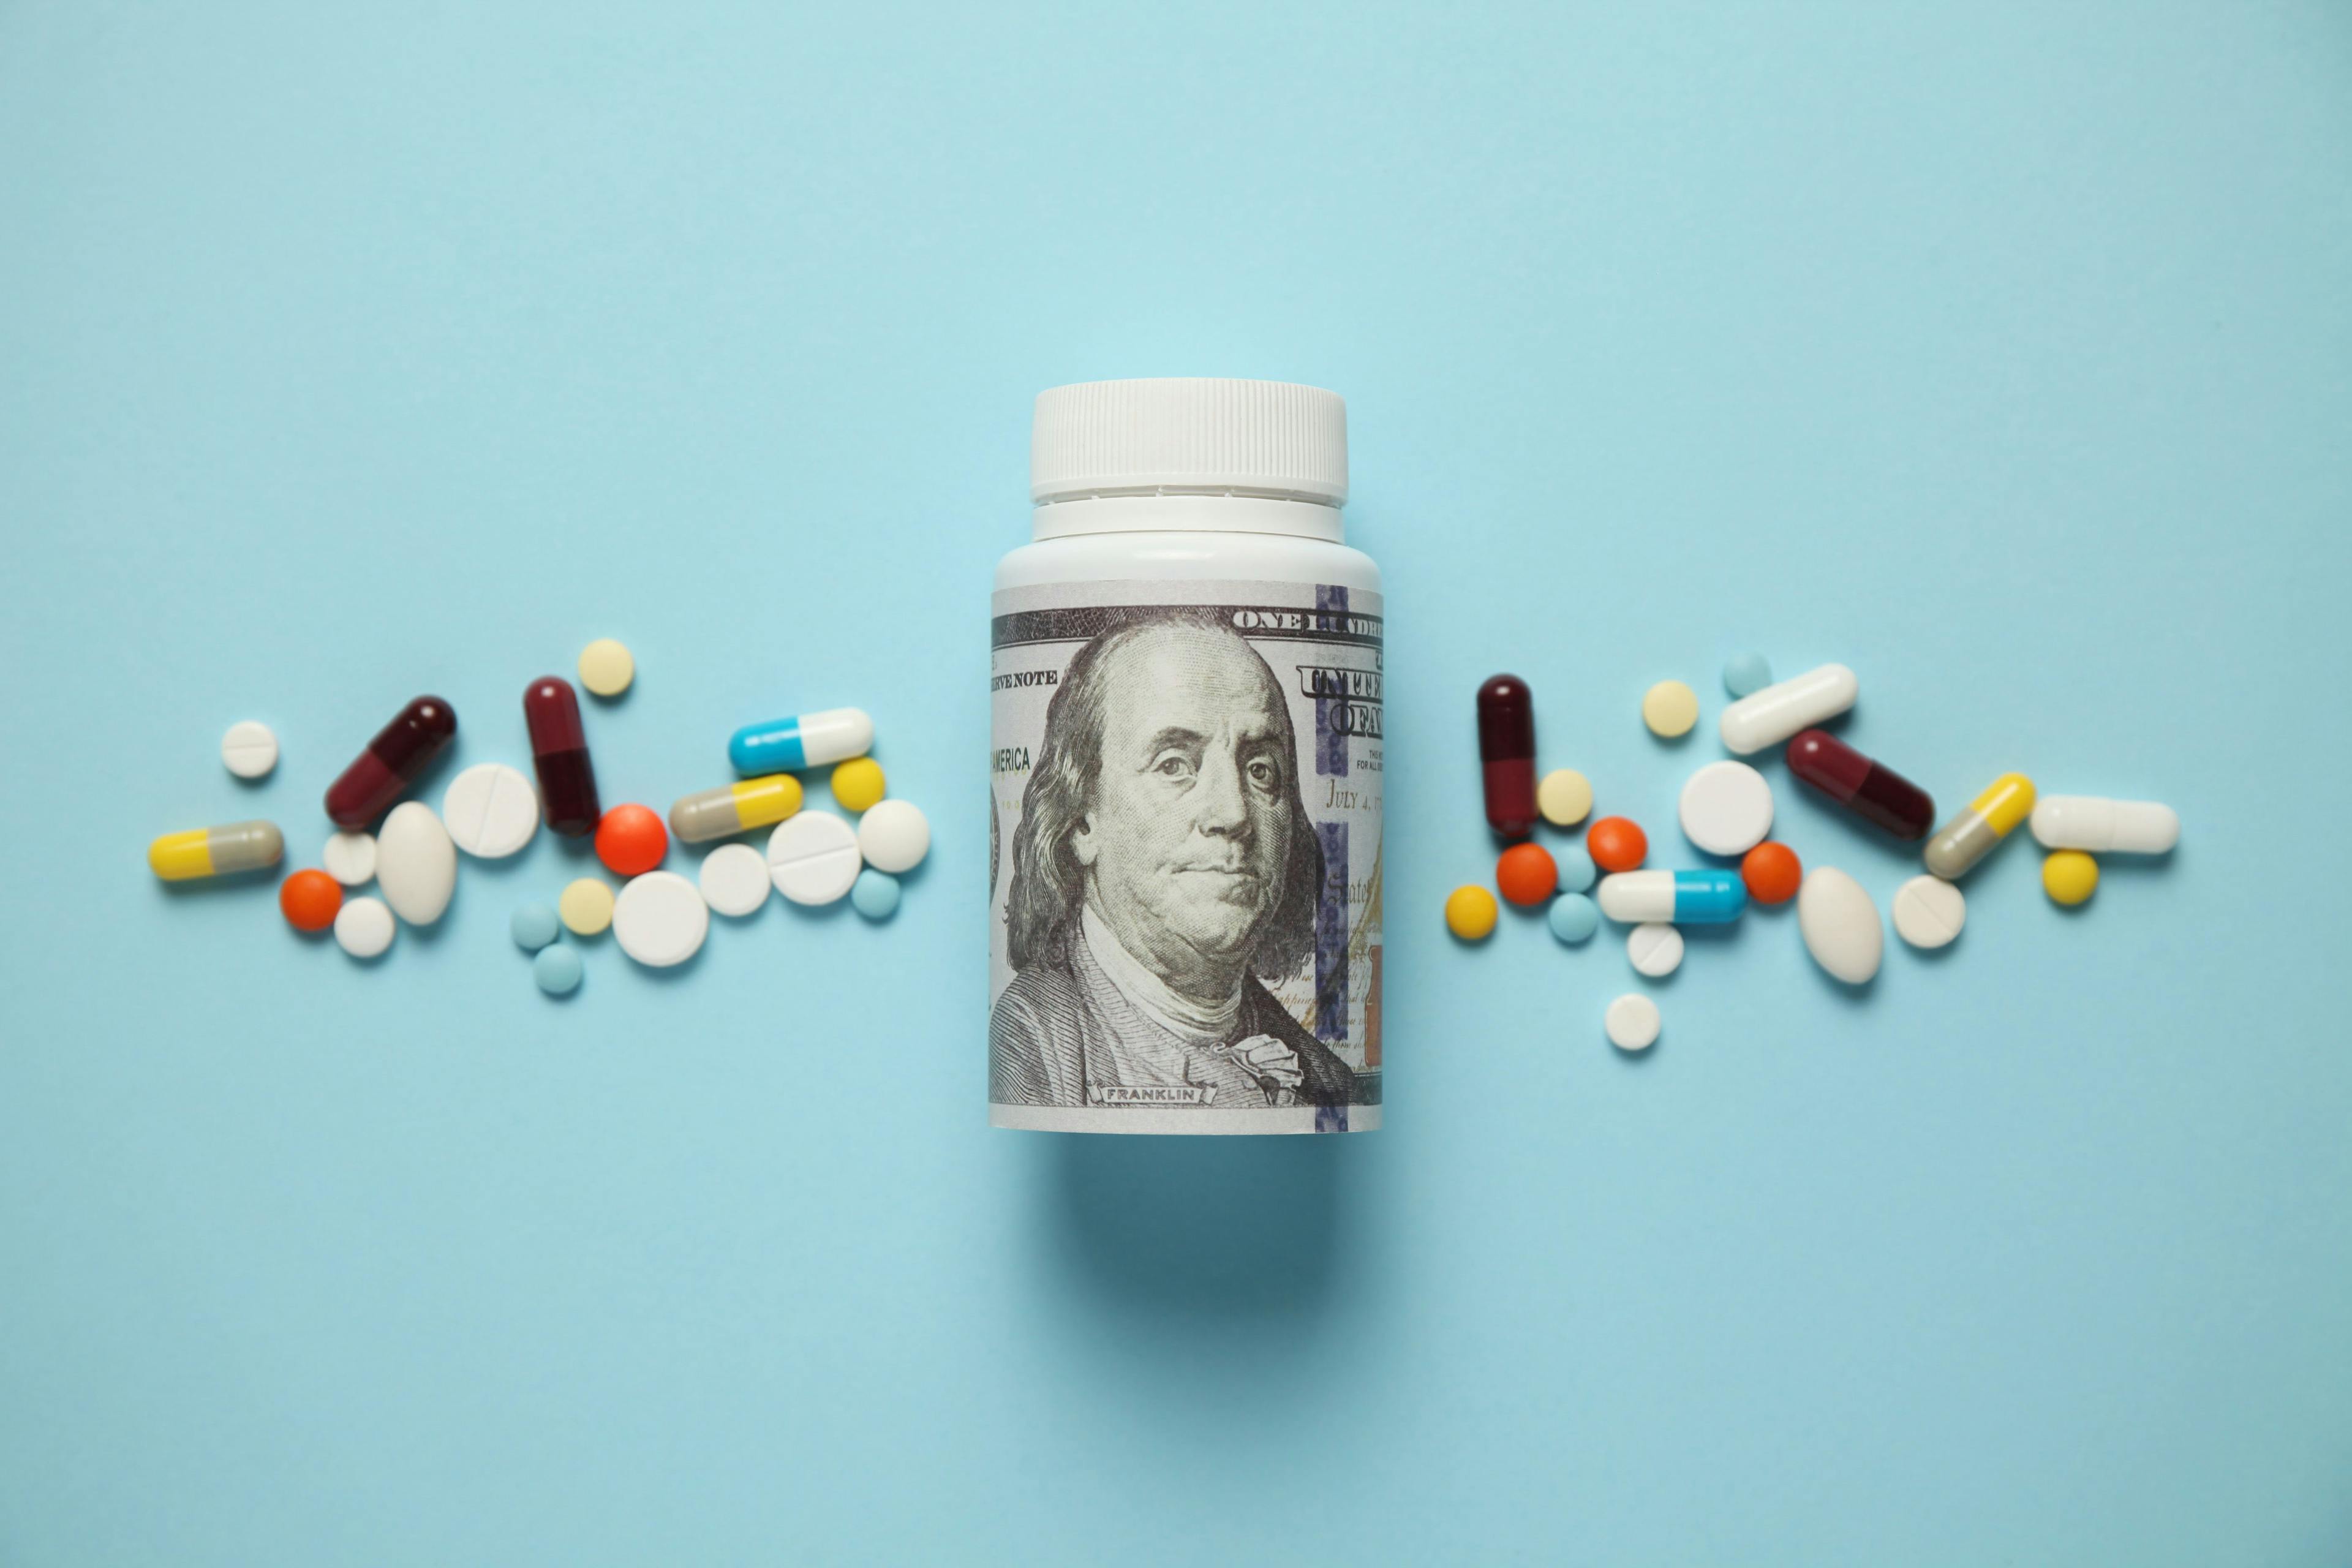 Money and pills of different colors on blue background. Rising cost of health care - Image credit: Andrii Zastrozhnov | stock.adobe.com